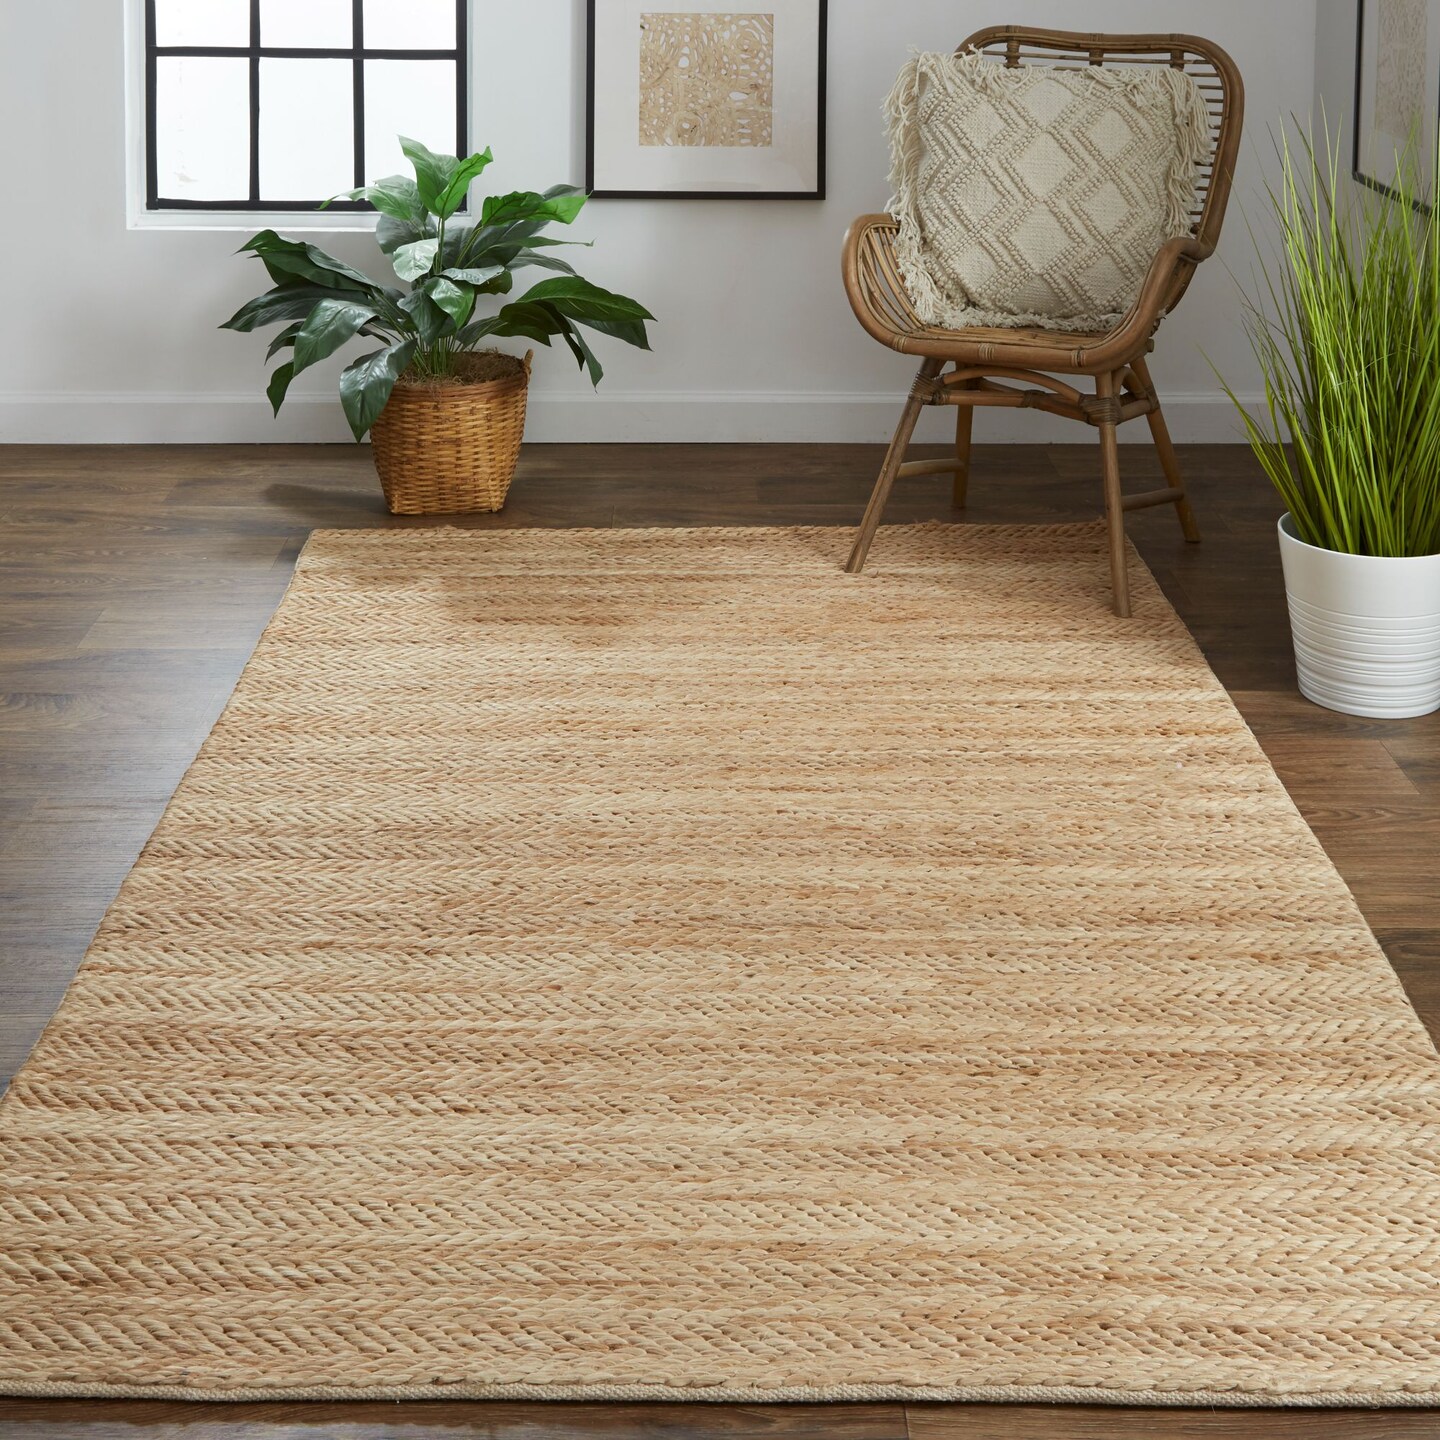 Spruce Up Your Space with a New Area Rug